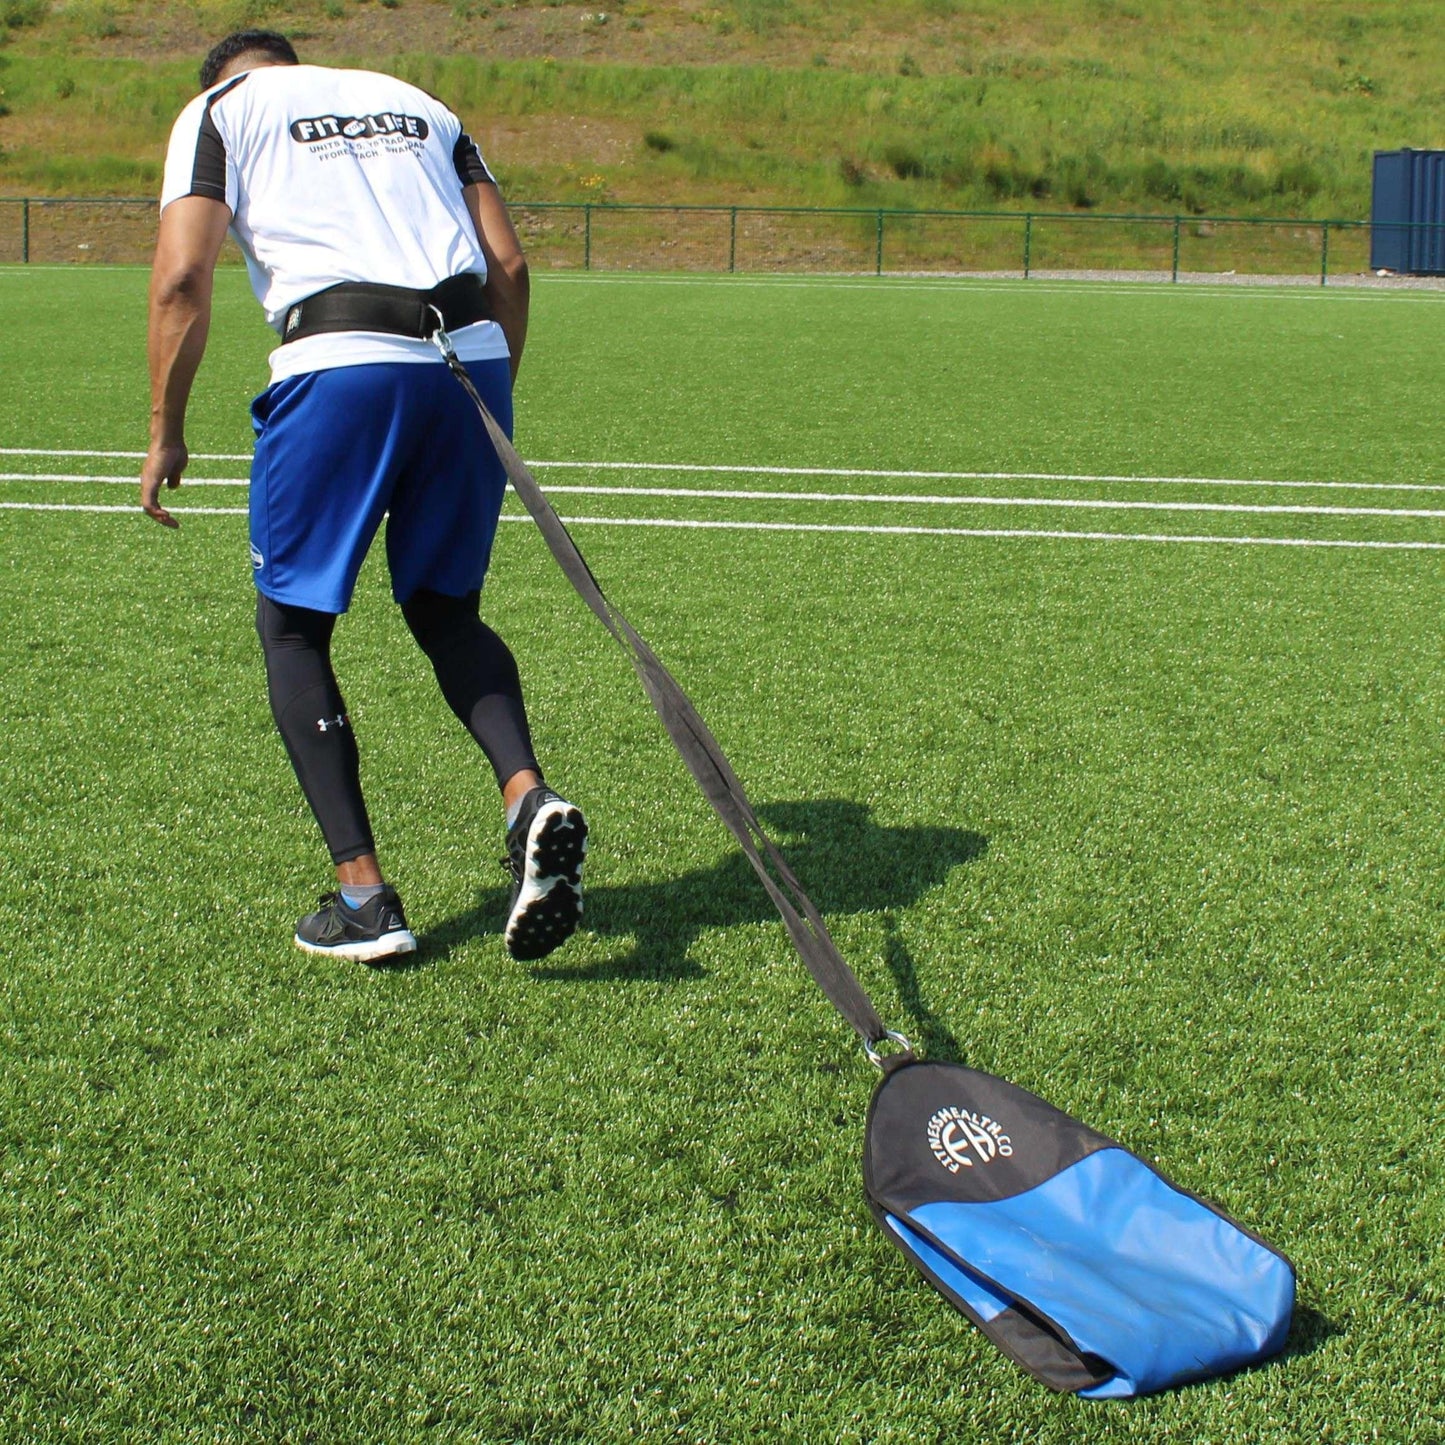 FH Pro Speed Sled Sack Weight Sprint Trainer Power Bag - Fitness Health 